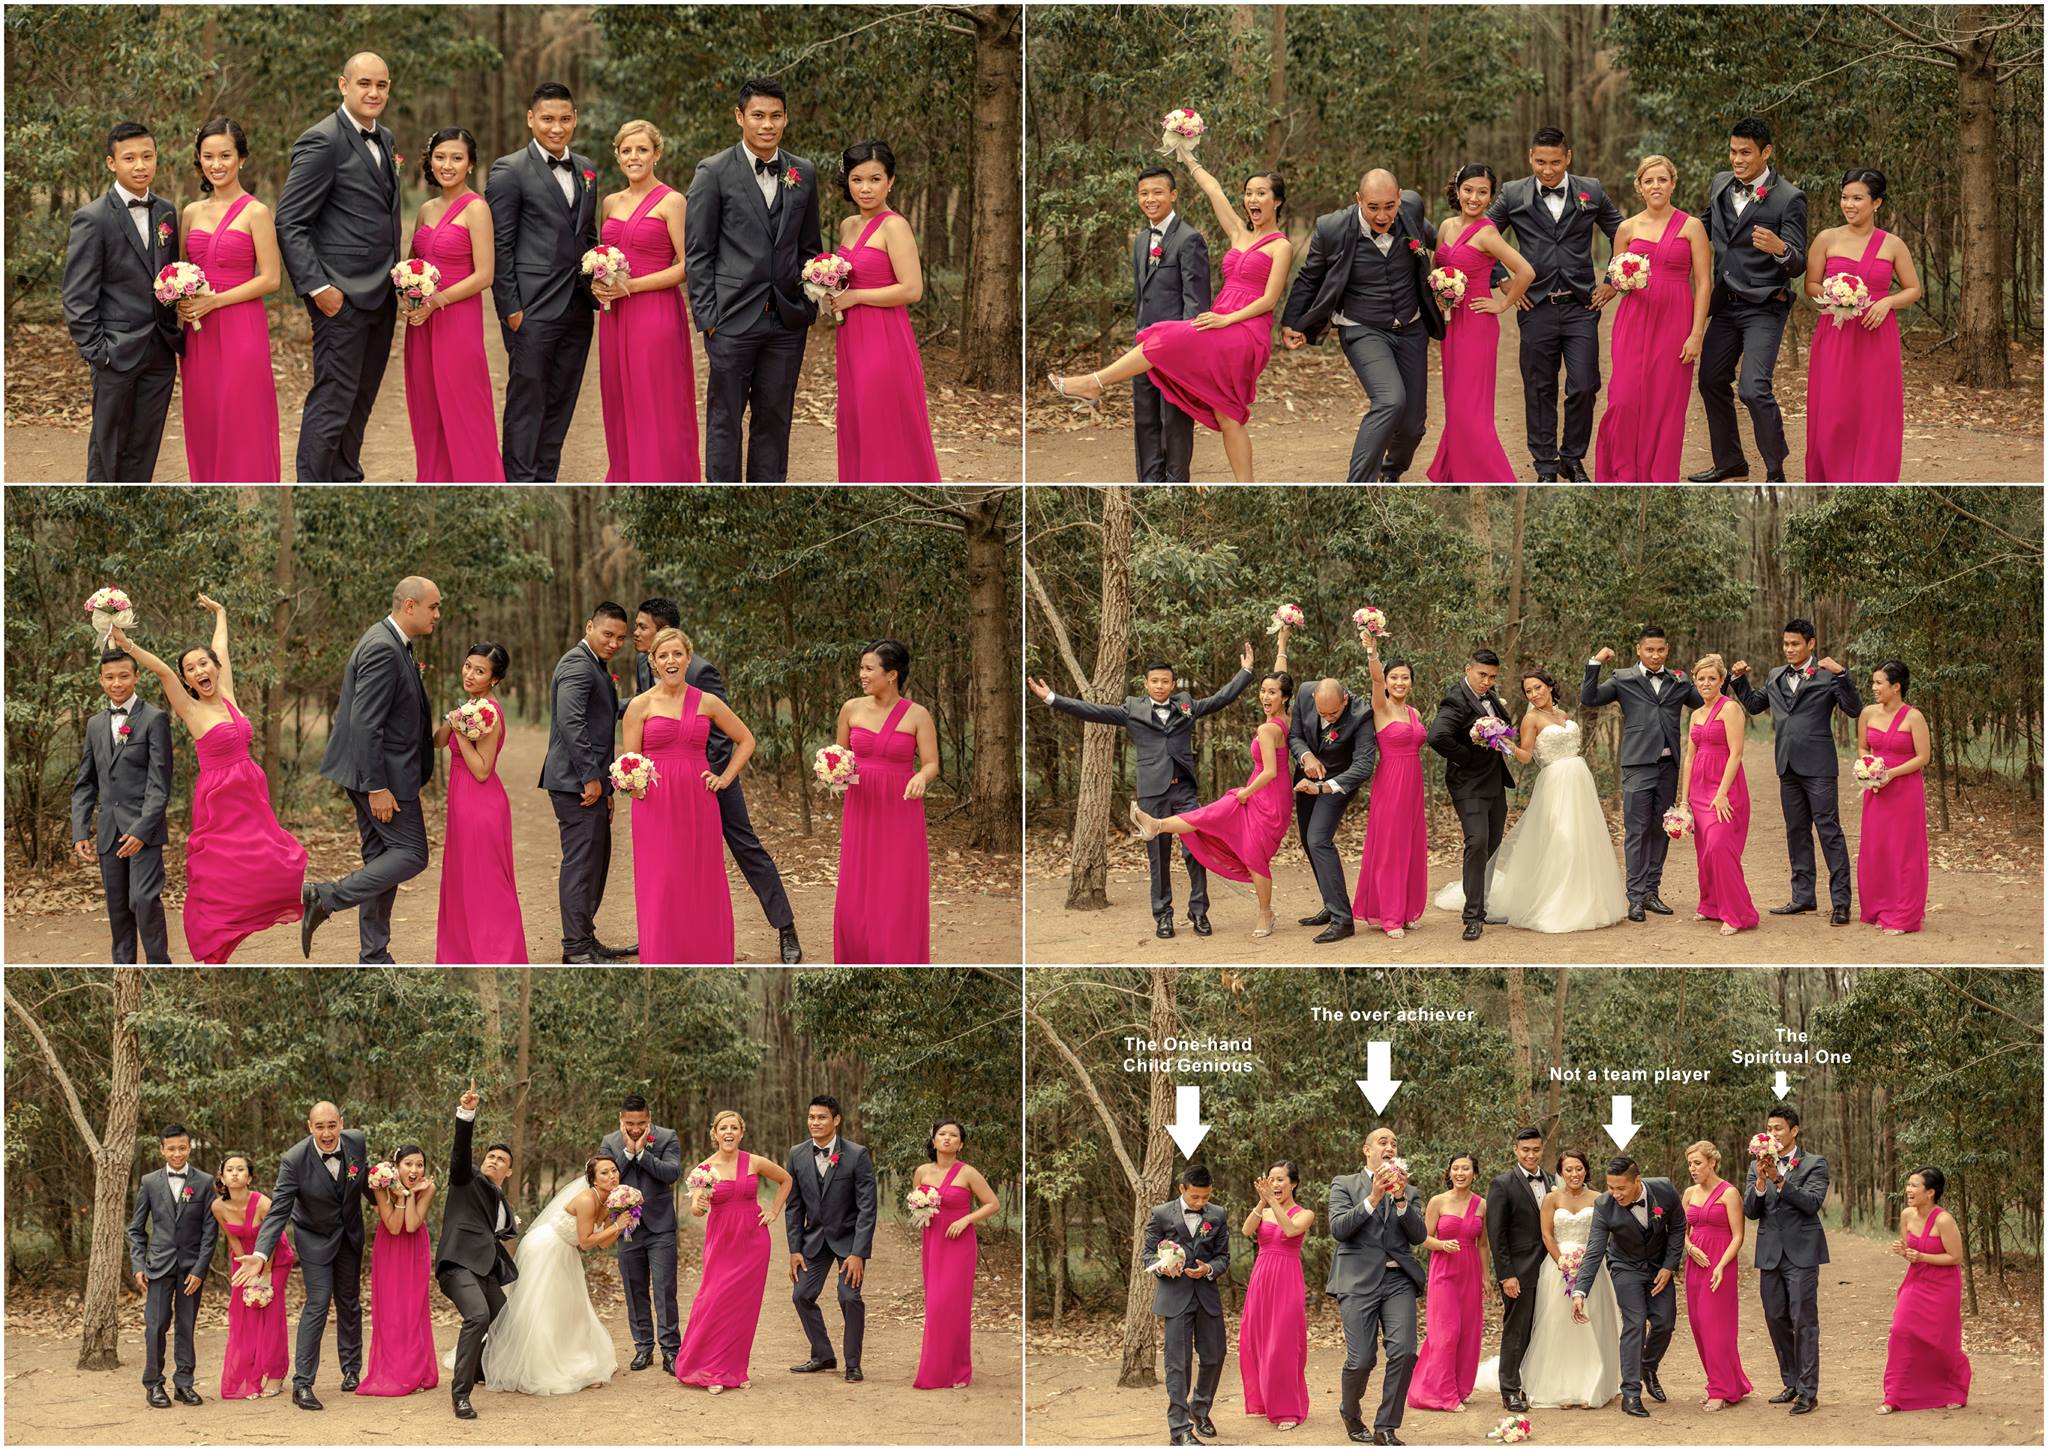 The Crazy Bridal Party!